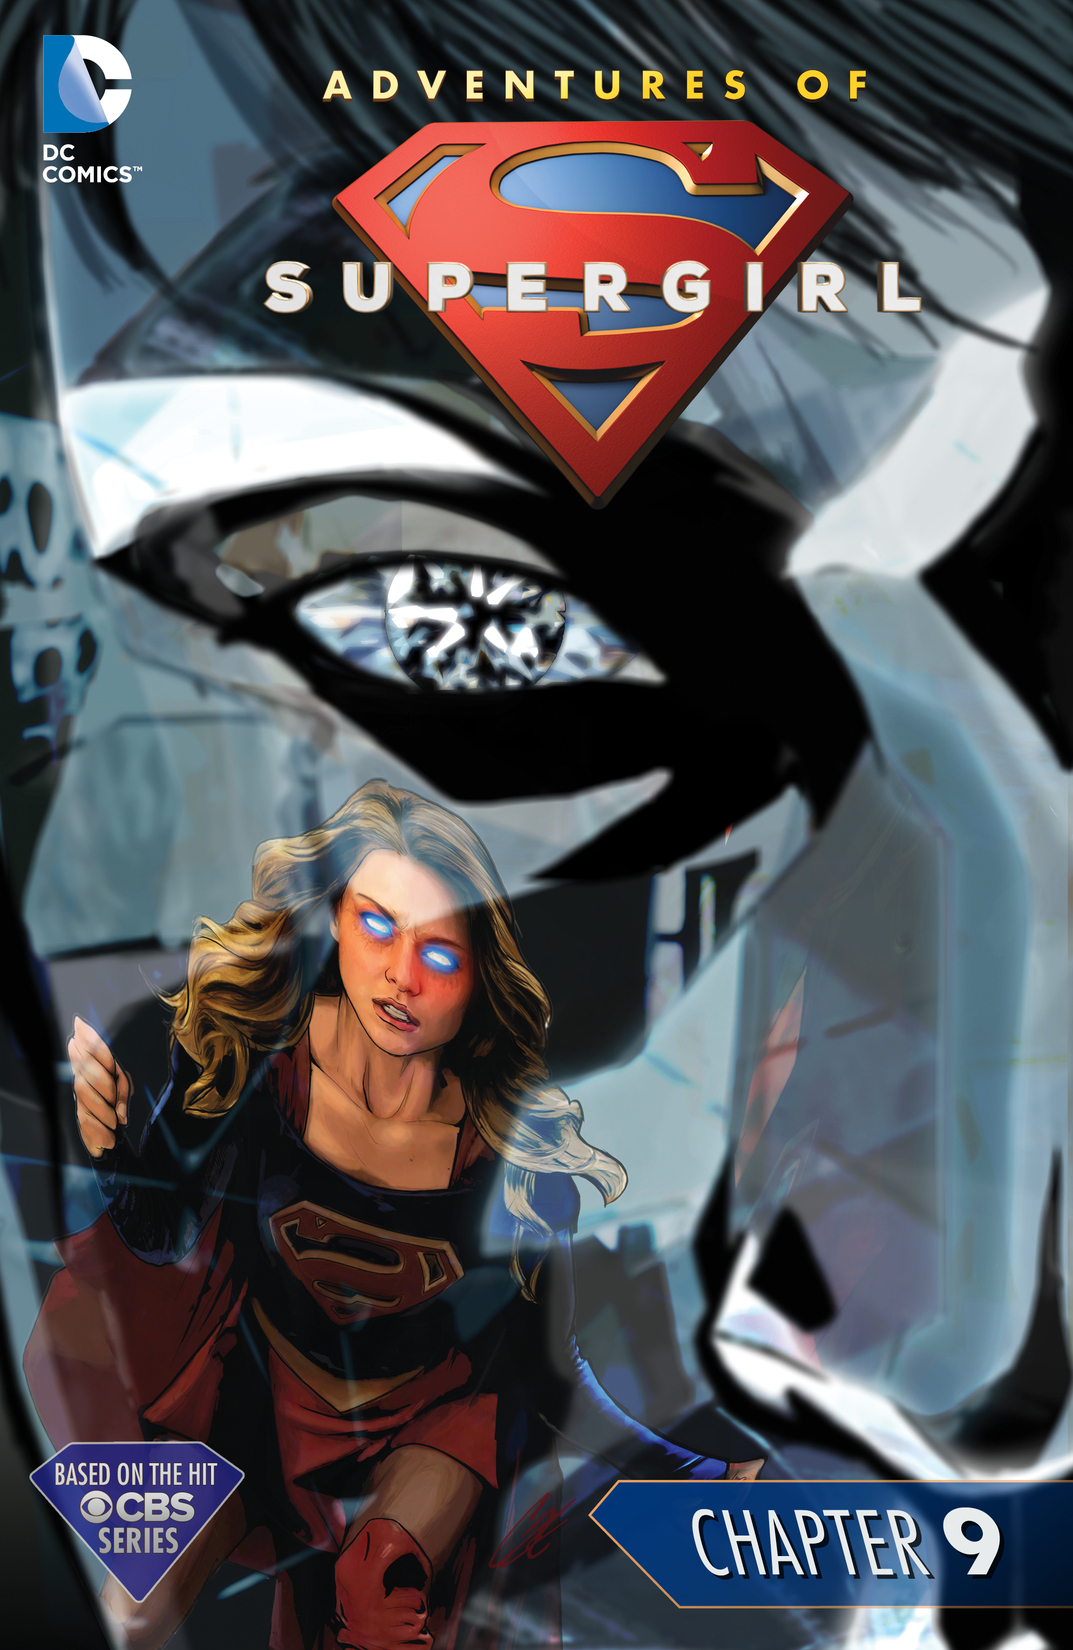 The Adventures of Supergirl #9 preview images